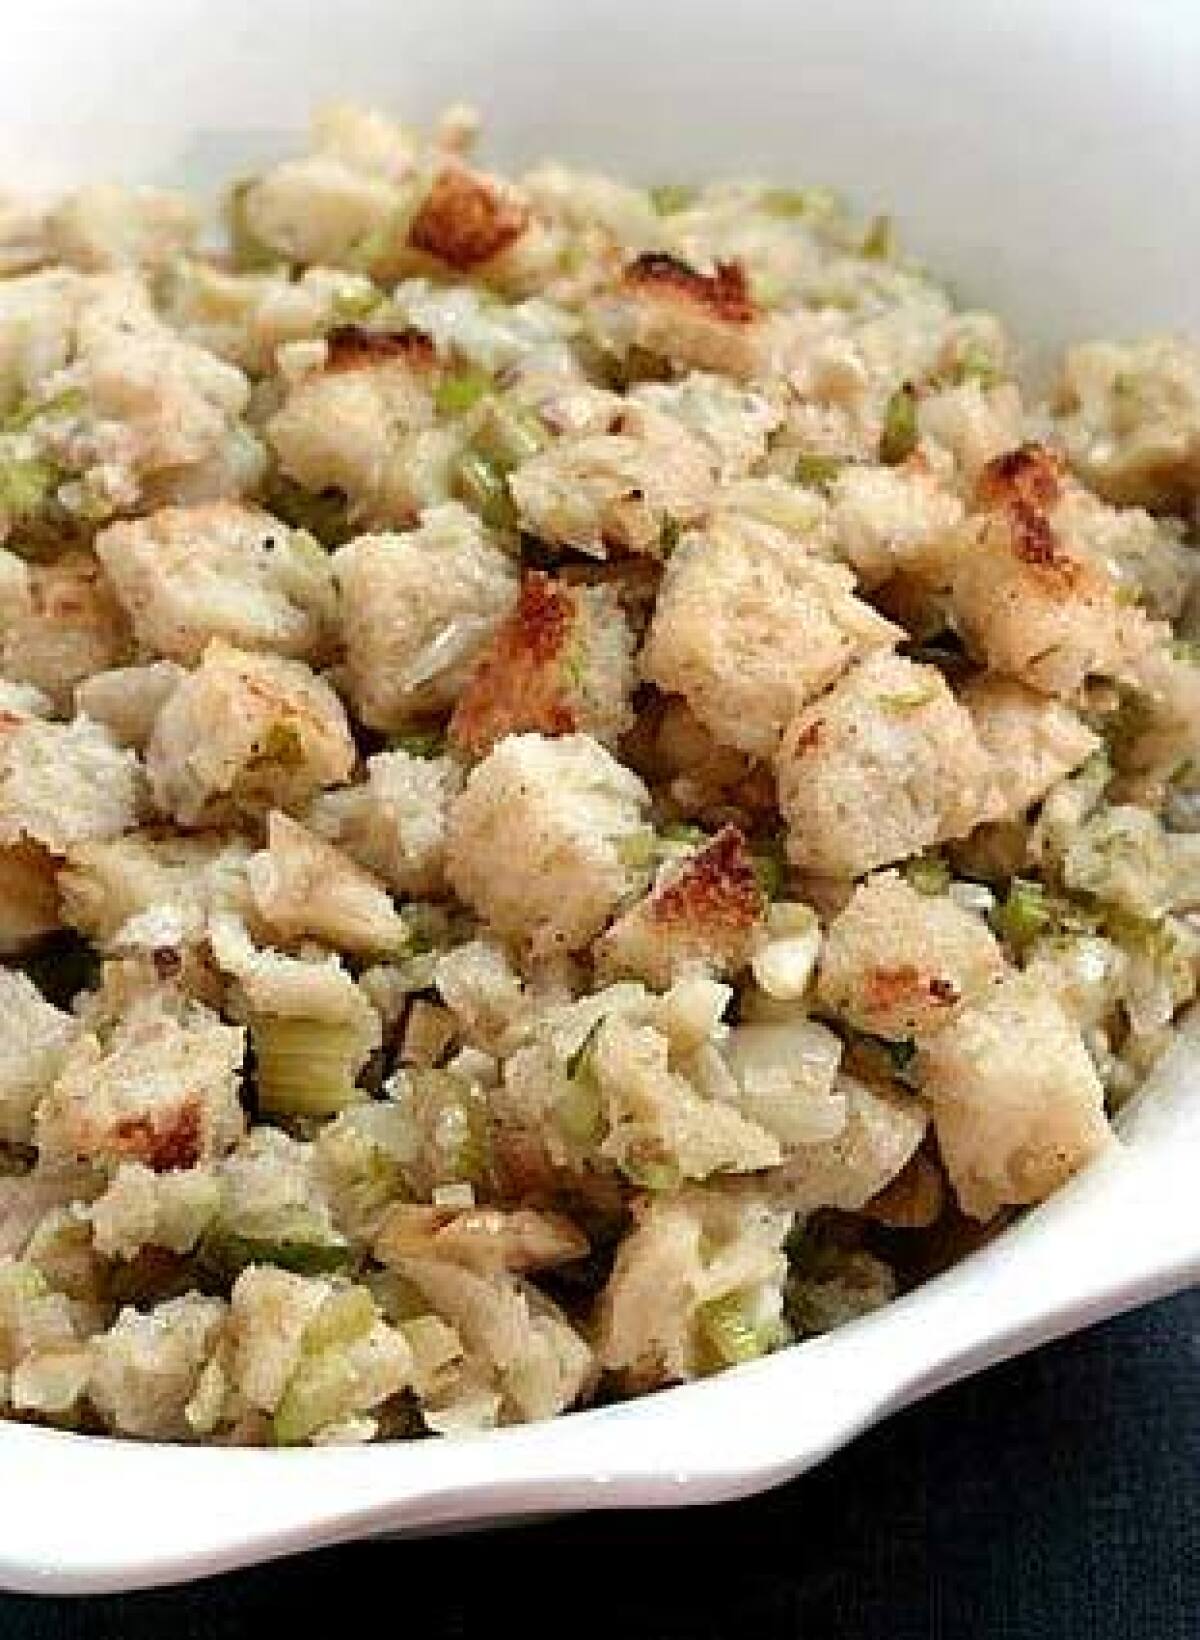 Stove Top Stuffing - Together as Family